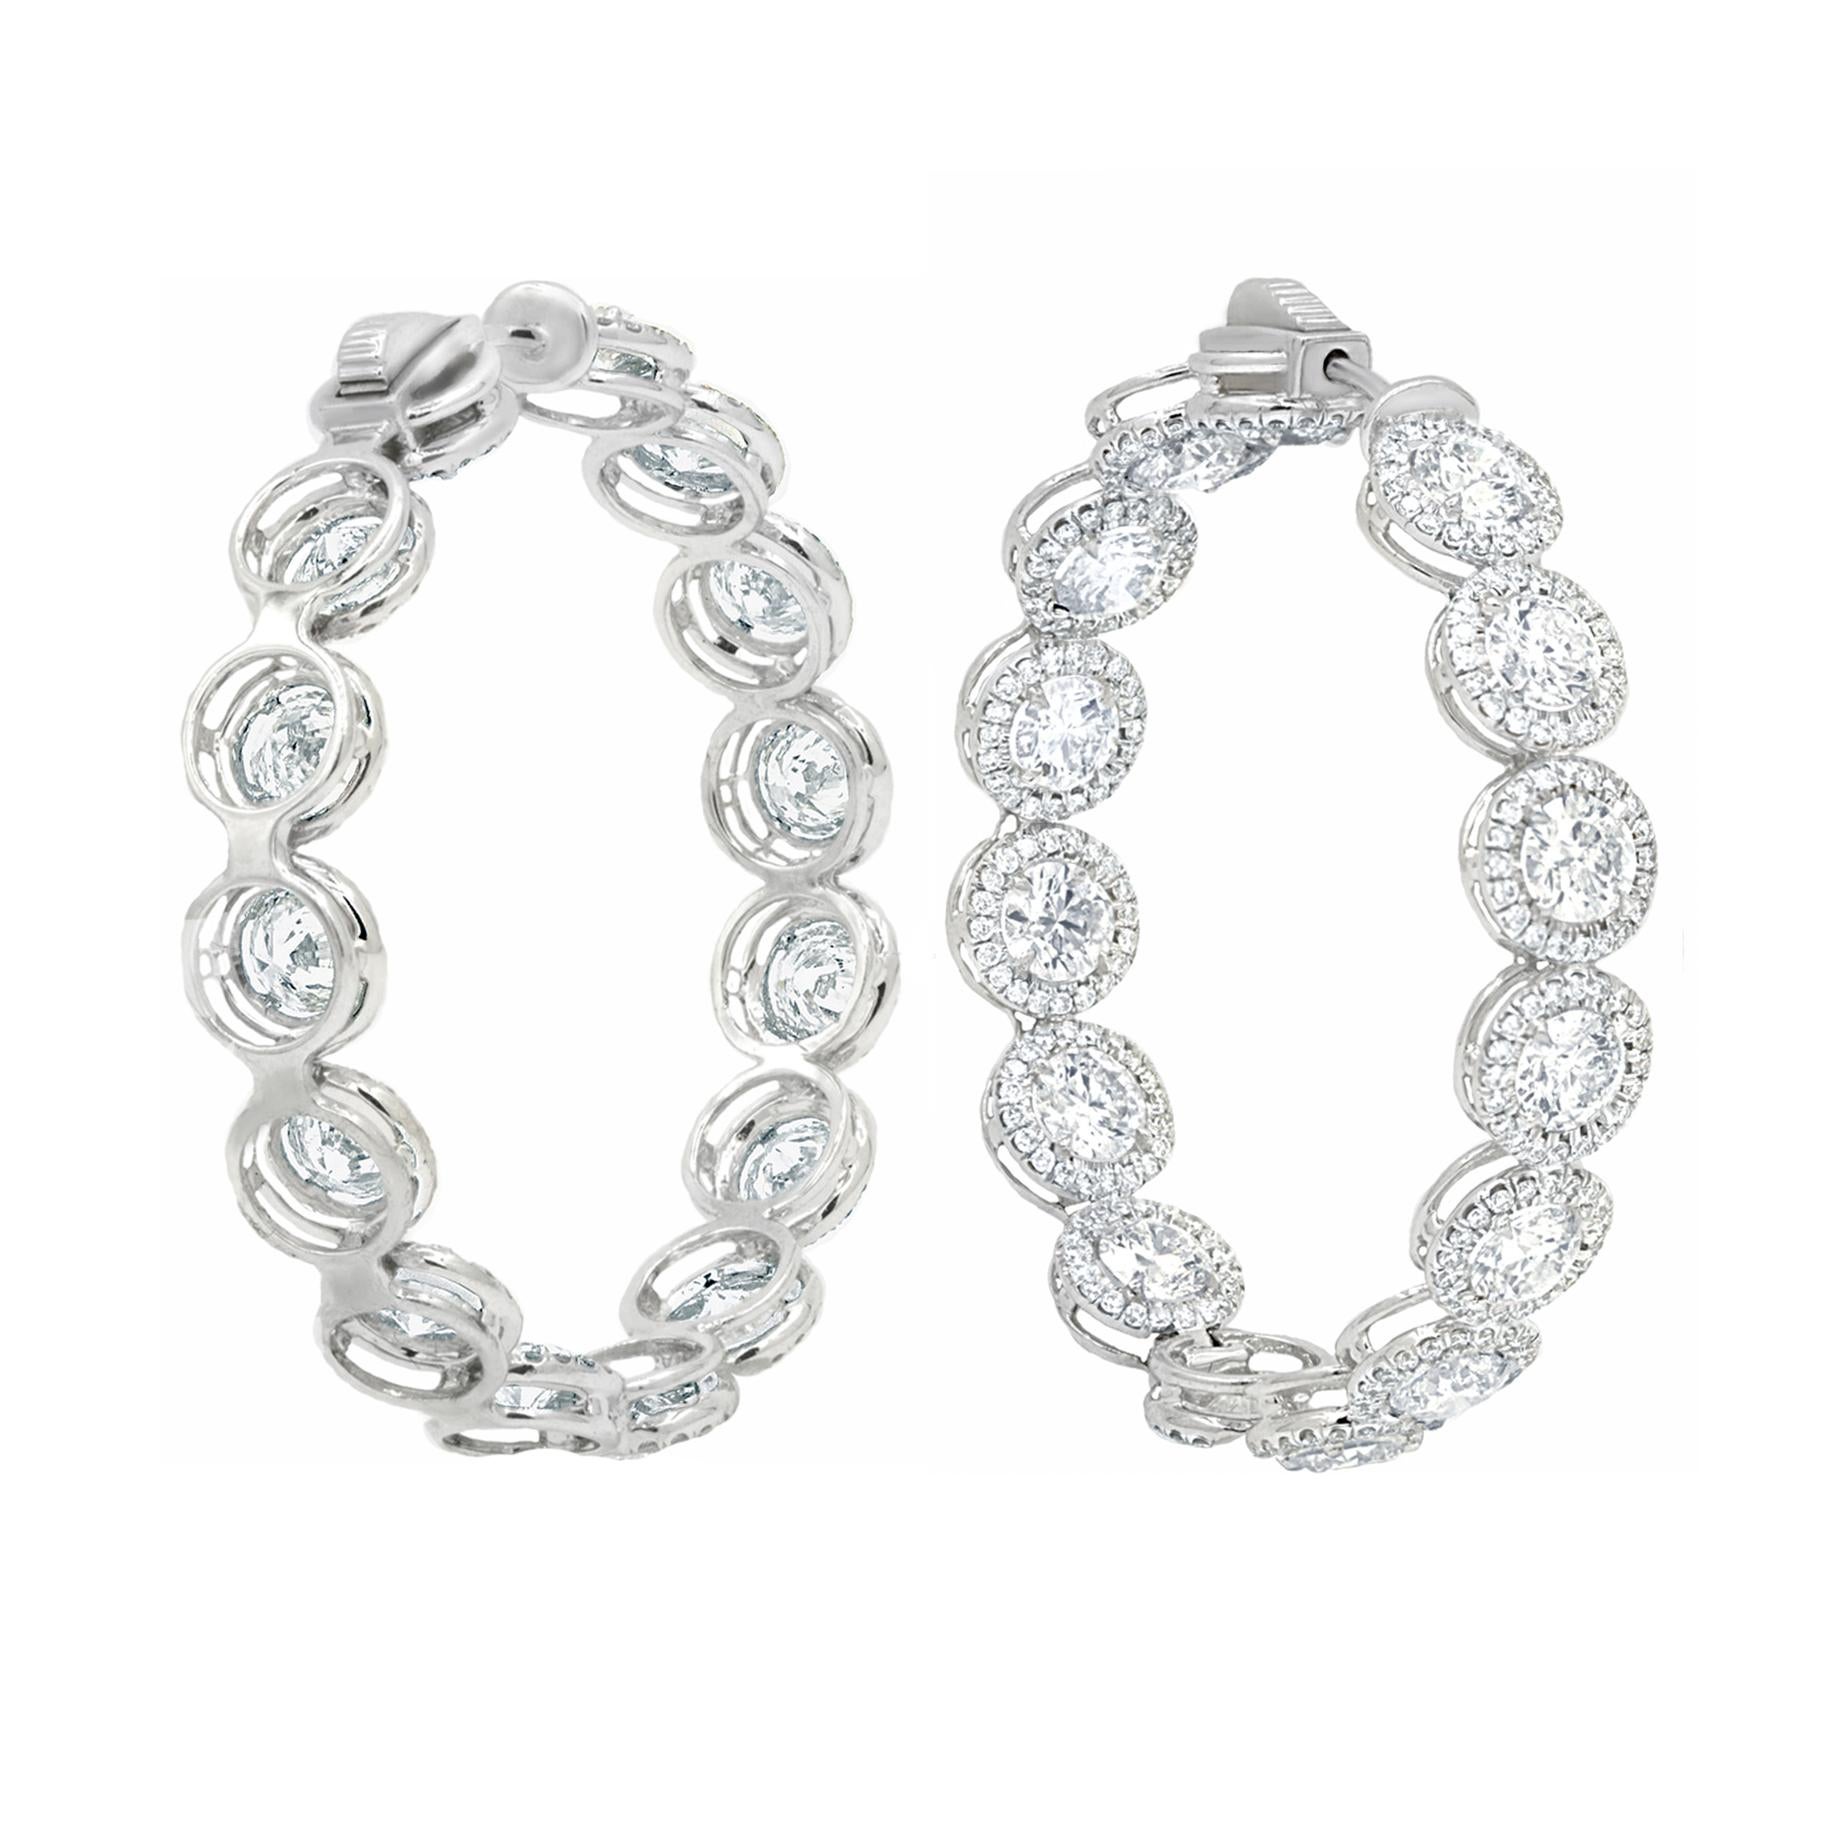 18 kt white gold inside-out hoop earrings with a halo design adorned with 12.20 cts tw of diamonds surrounded by smaller diamonds
Diana M. is a leading supplier of top-quality fine jewelry for over 35 years.
Diana M is one-stop shop for all your